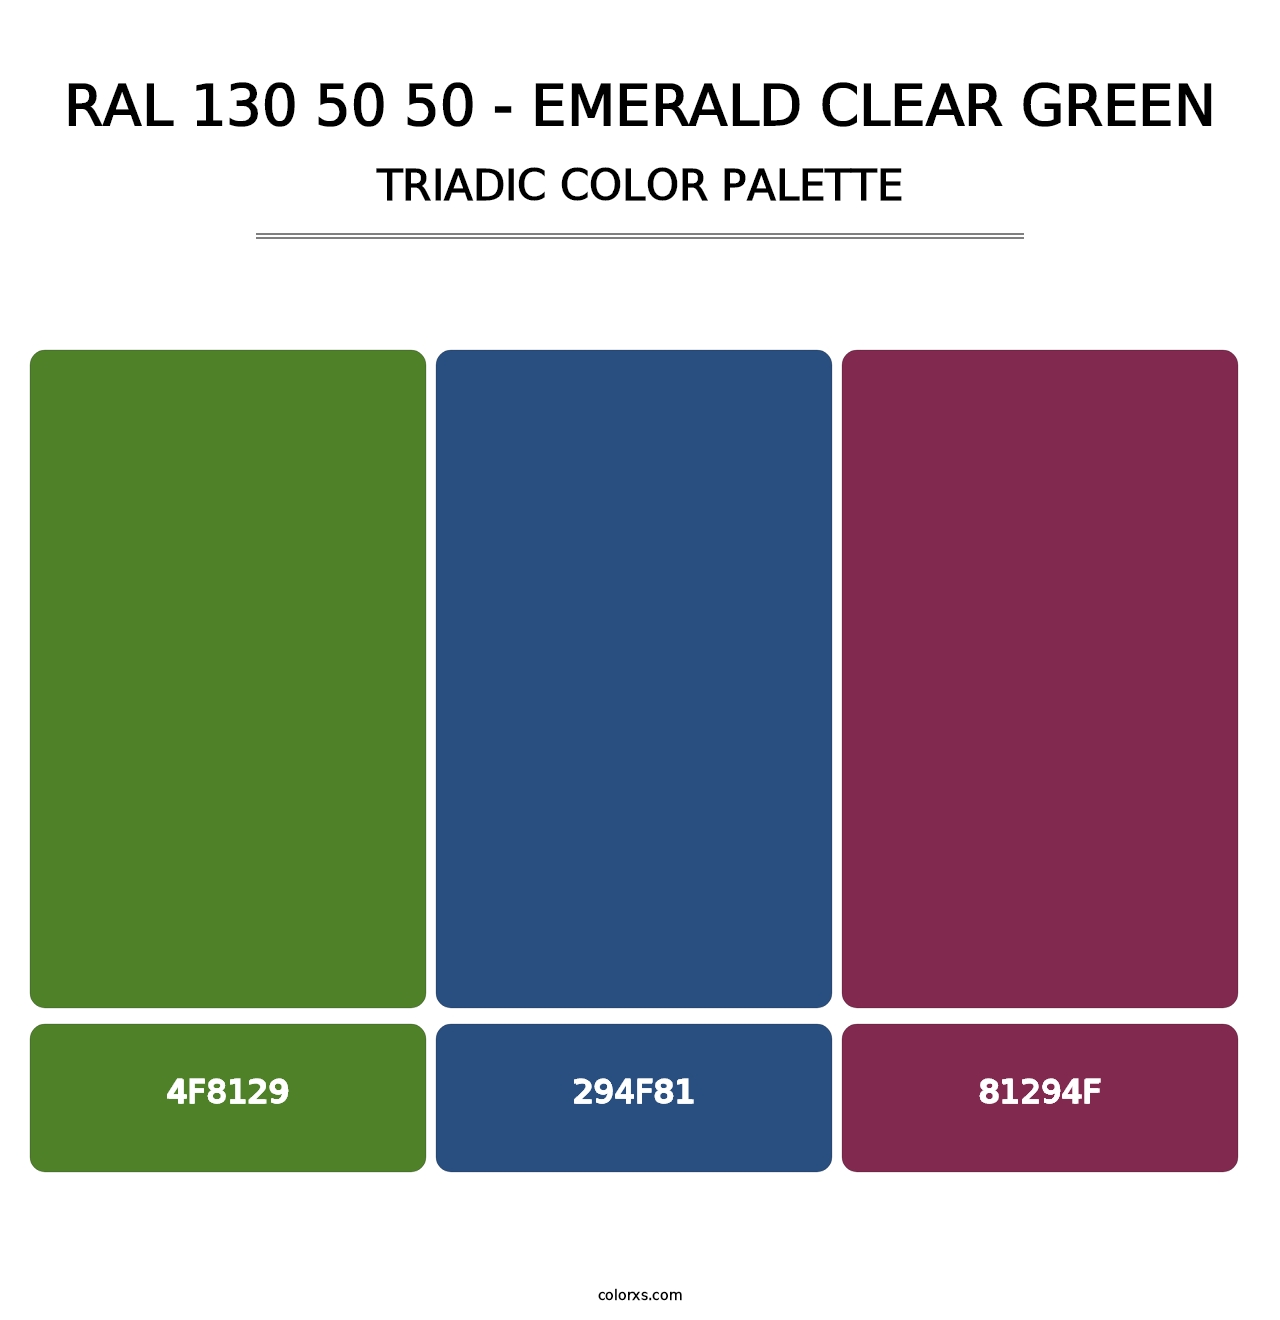 RAL 130 50 50 - Emerald Clear Green - Triadic Color Palette